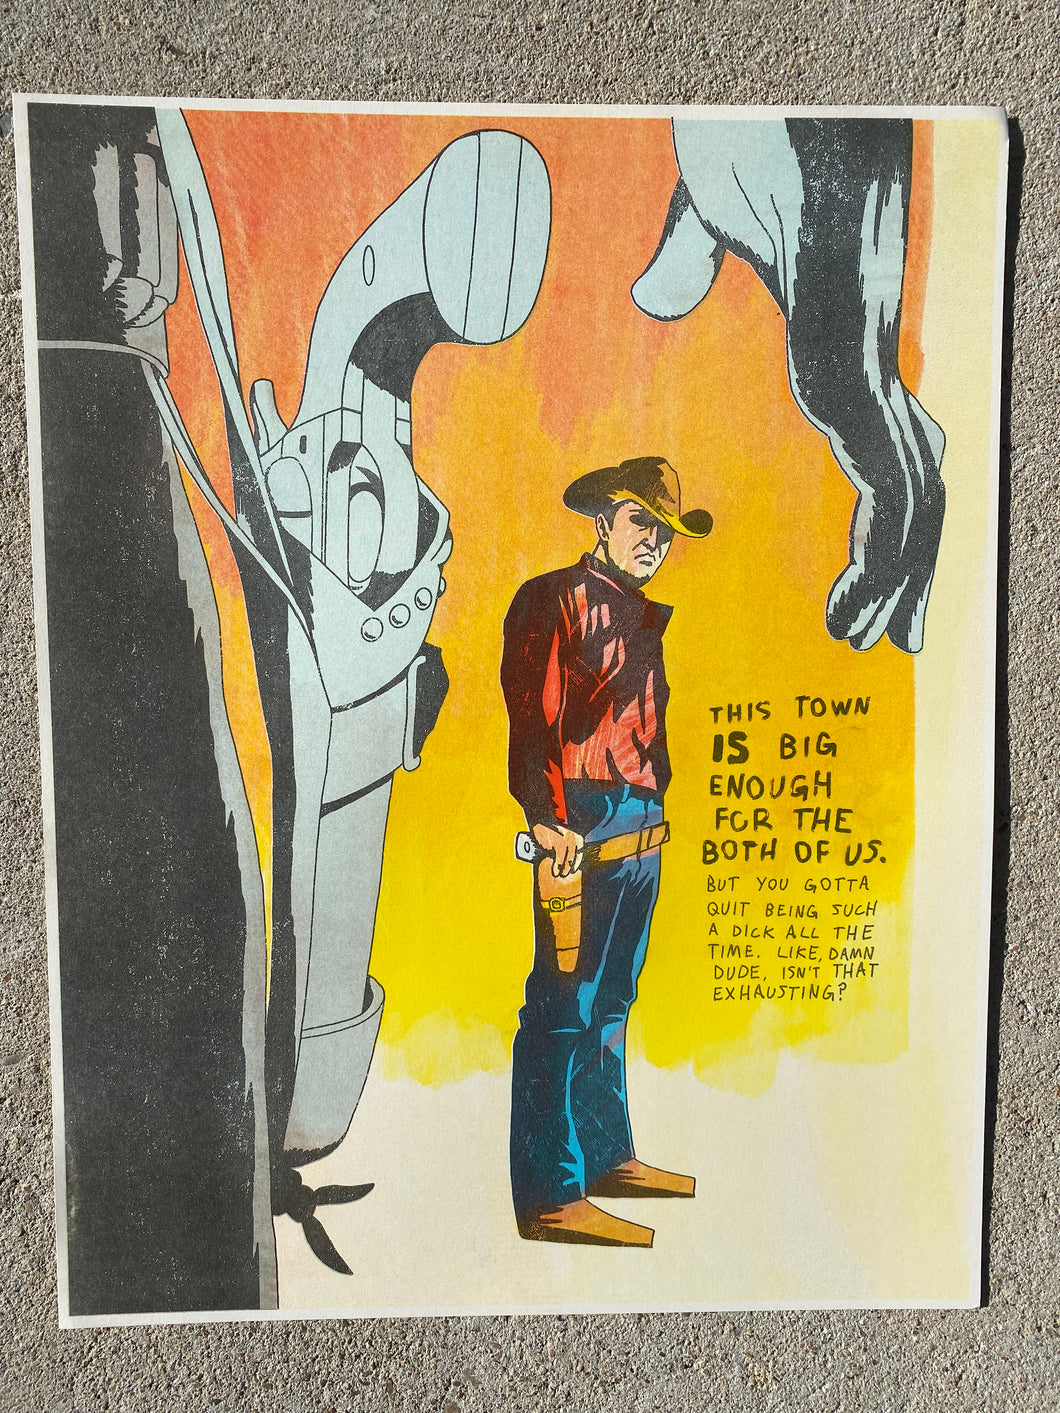 A print of a pistol and a hand near it with a Cowboy in the distance with his hand on his pistol.  Cowboy is wearing a red shirt, blue jeans, tan boots and hat.  To the right of the cowboy it reads 